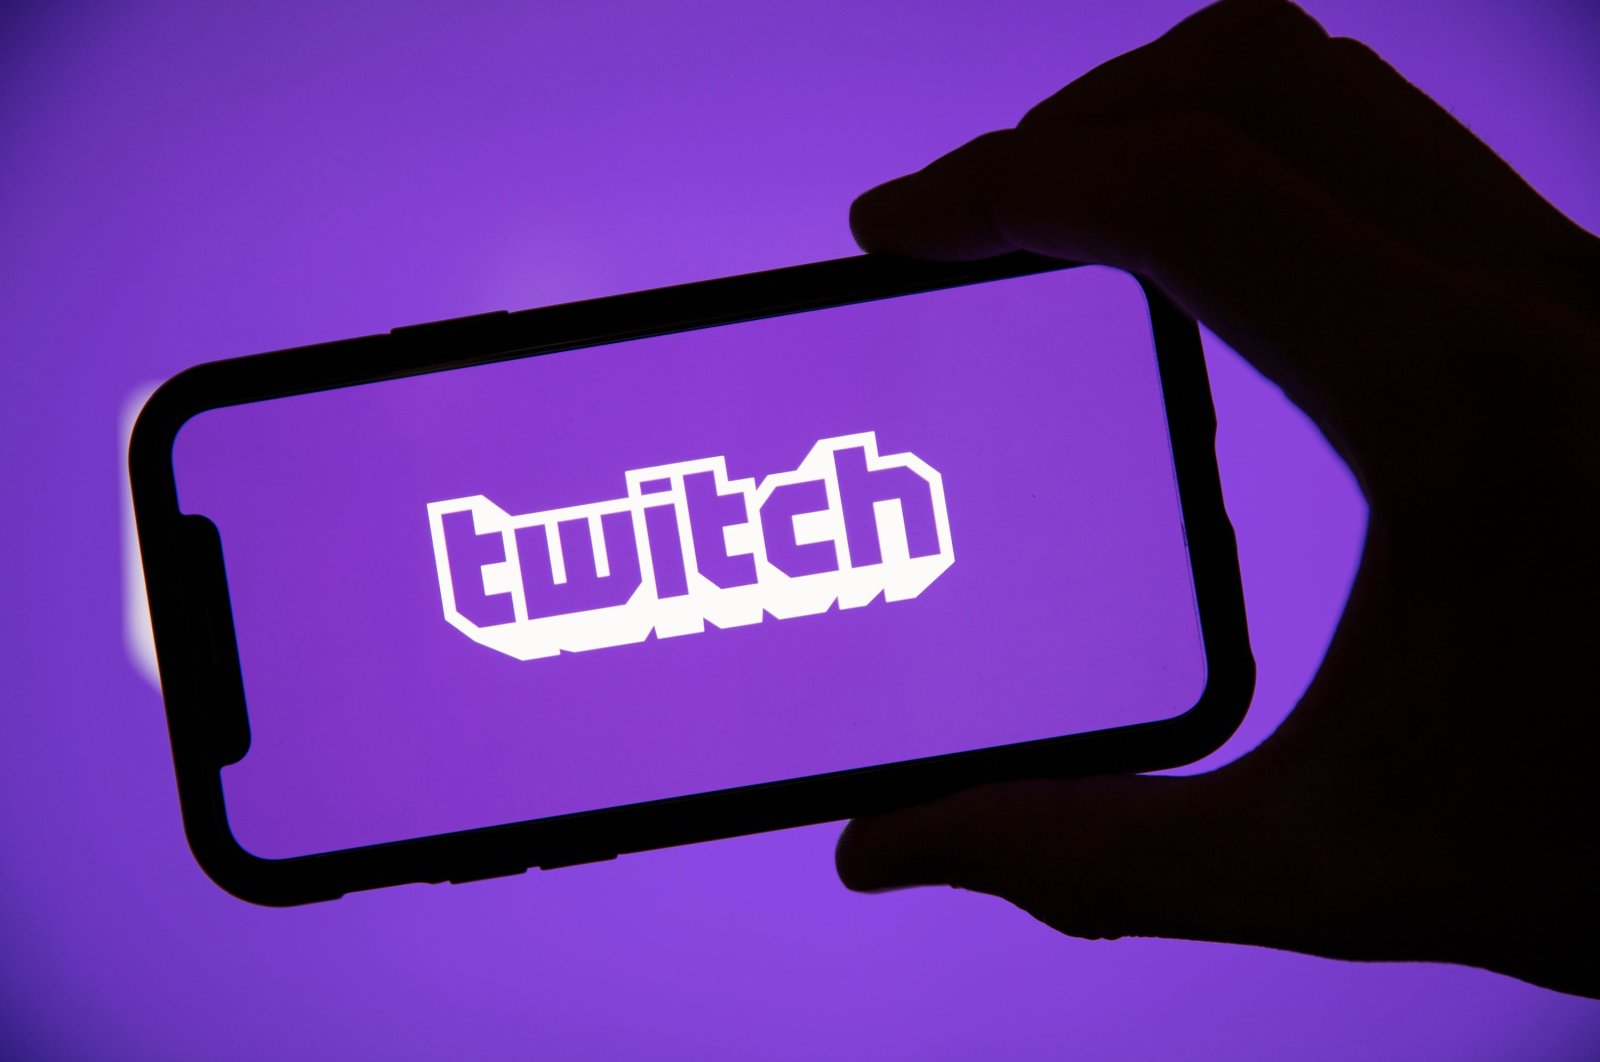 Twitch game live streaming logo on a smartphone, in London, United Kingdom, April 30, 2020. (Shutterstock Photo)